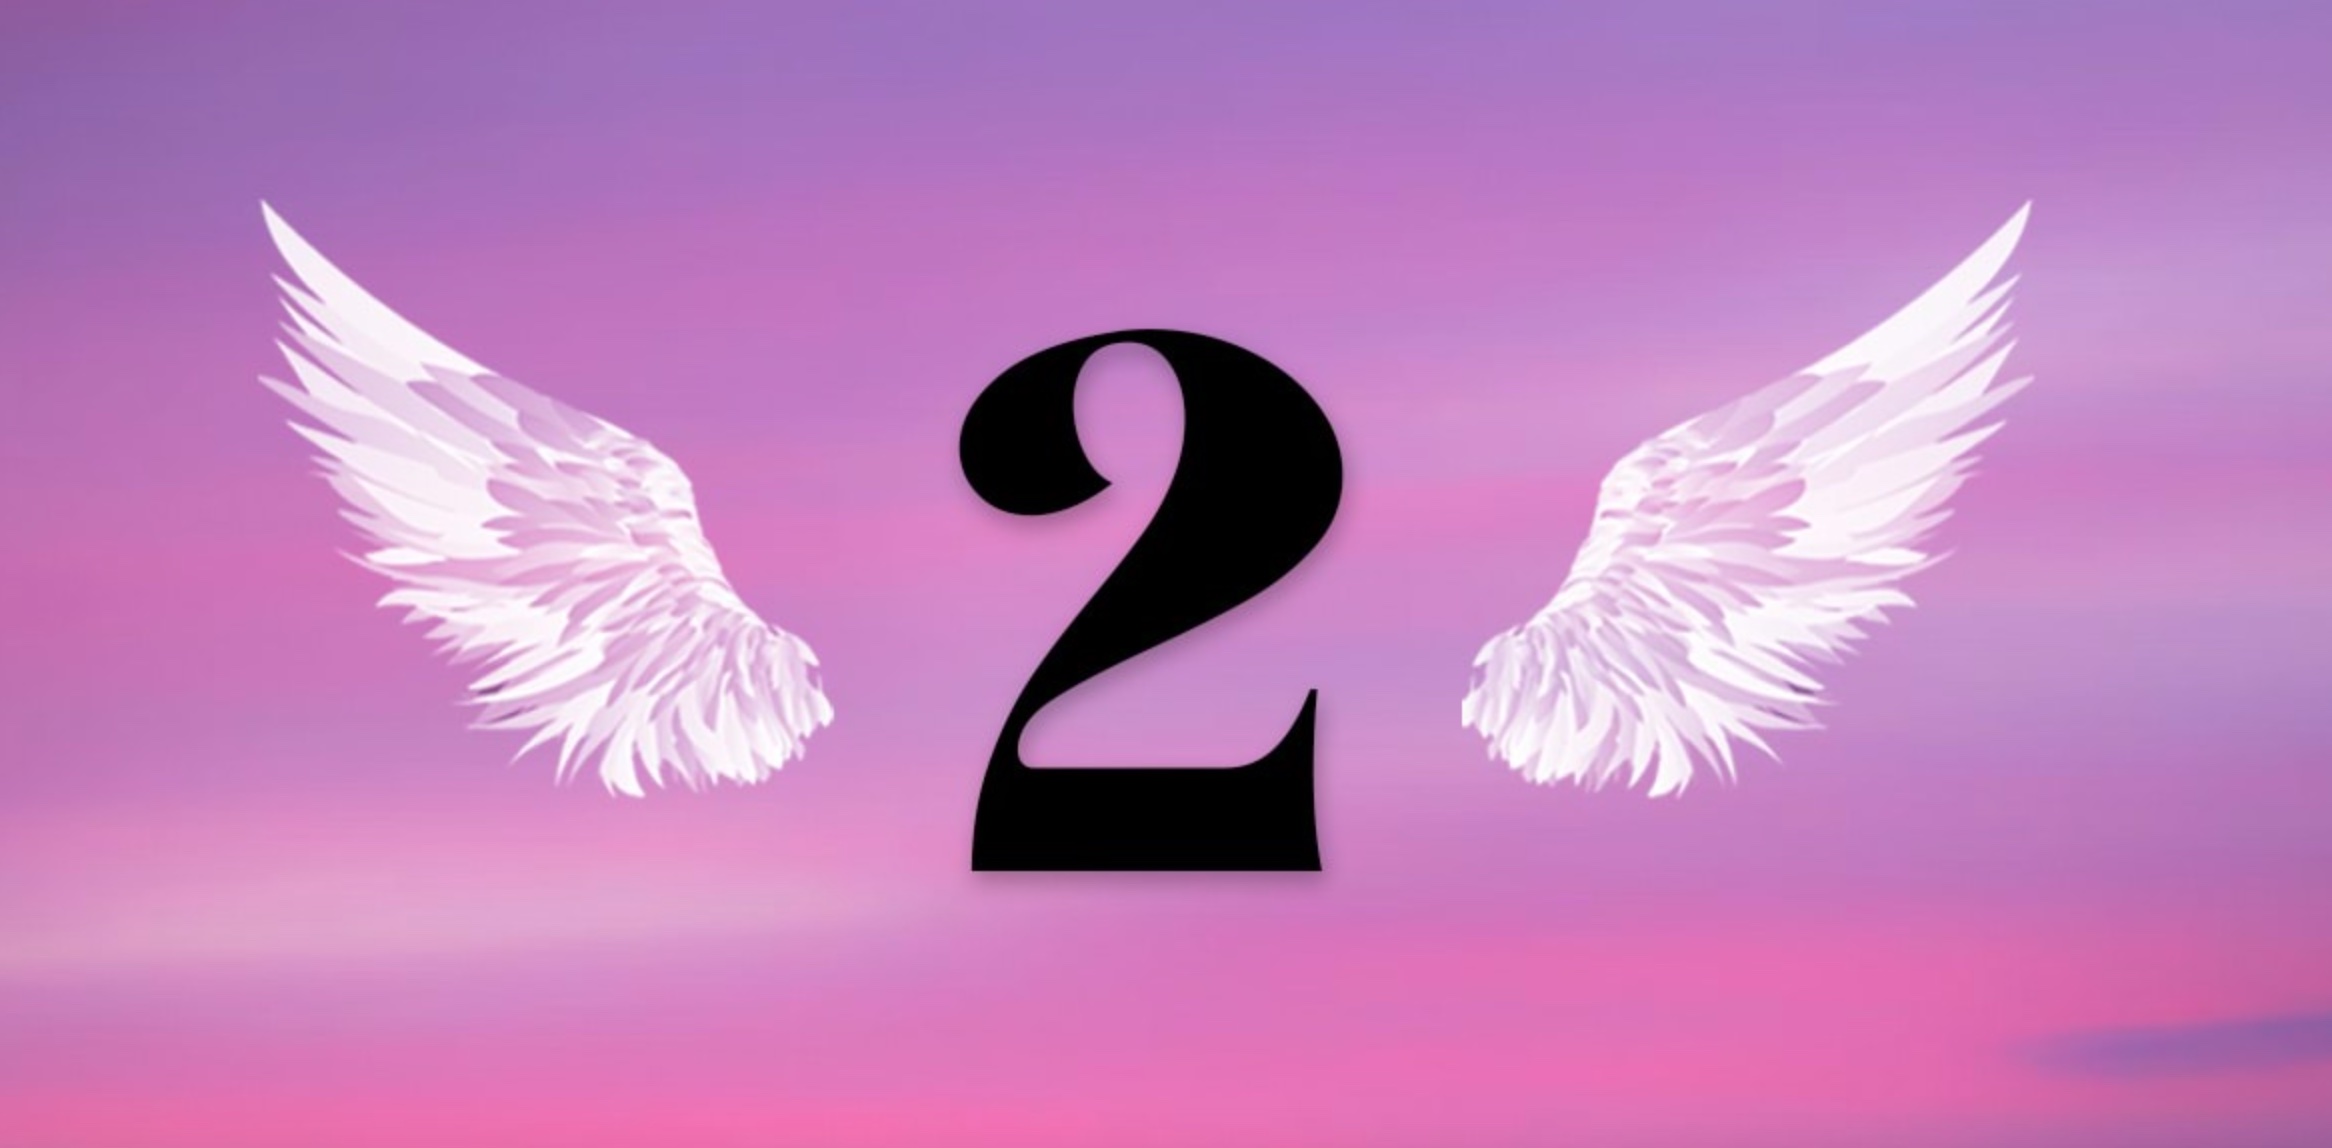 The Numerology and Symbolism of Angel Number 2 | Sarah Scoop